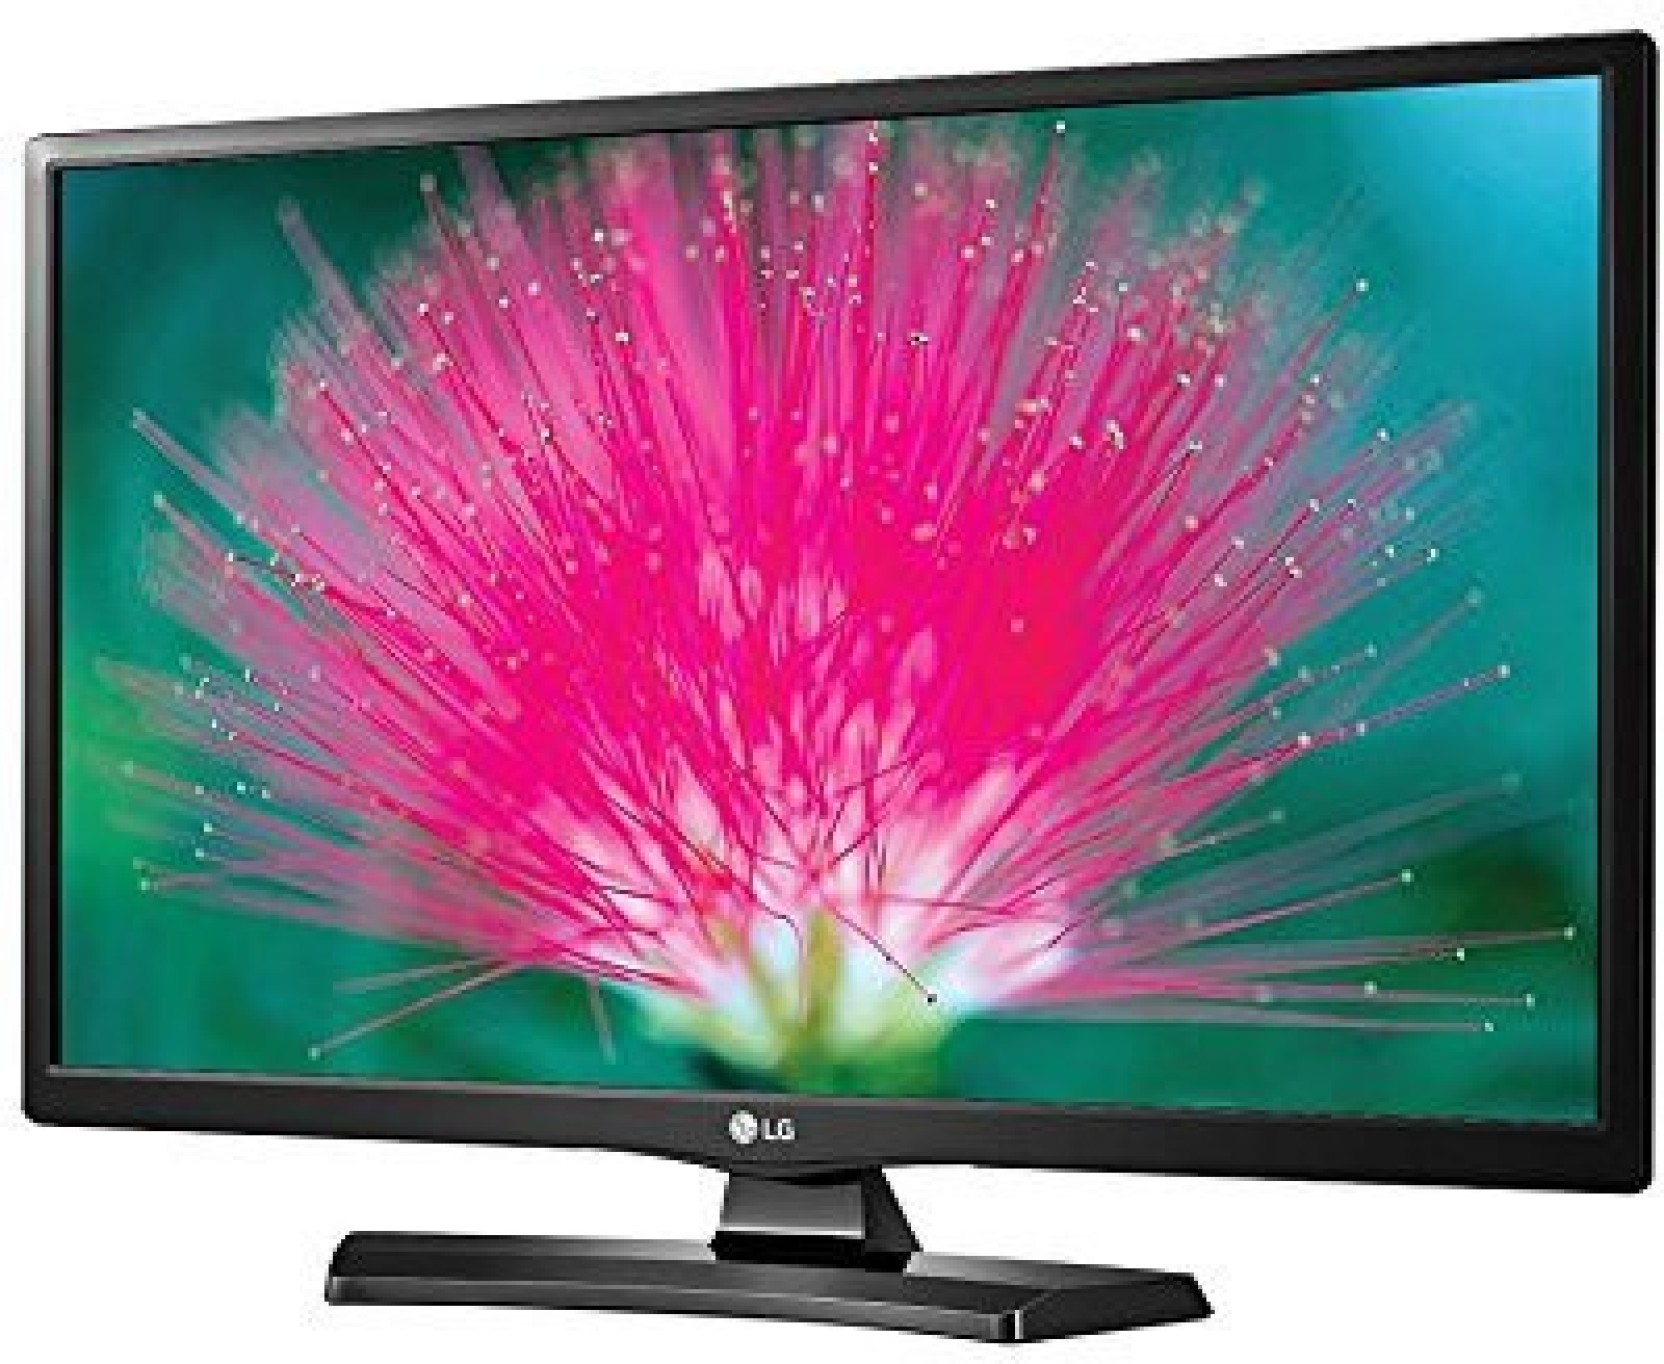 LG 55cm (22 inch) Full HD LED TV Online at best Prices In India